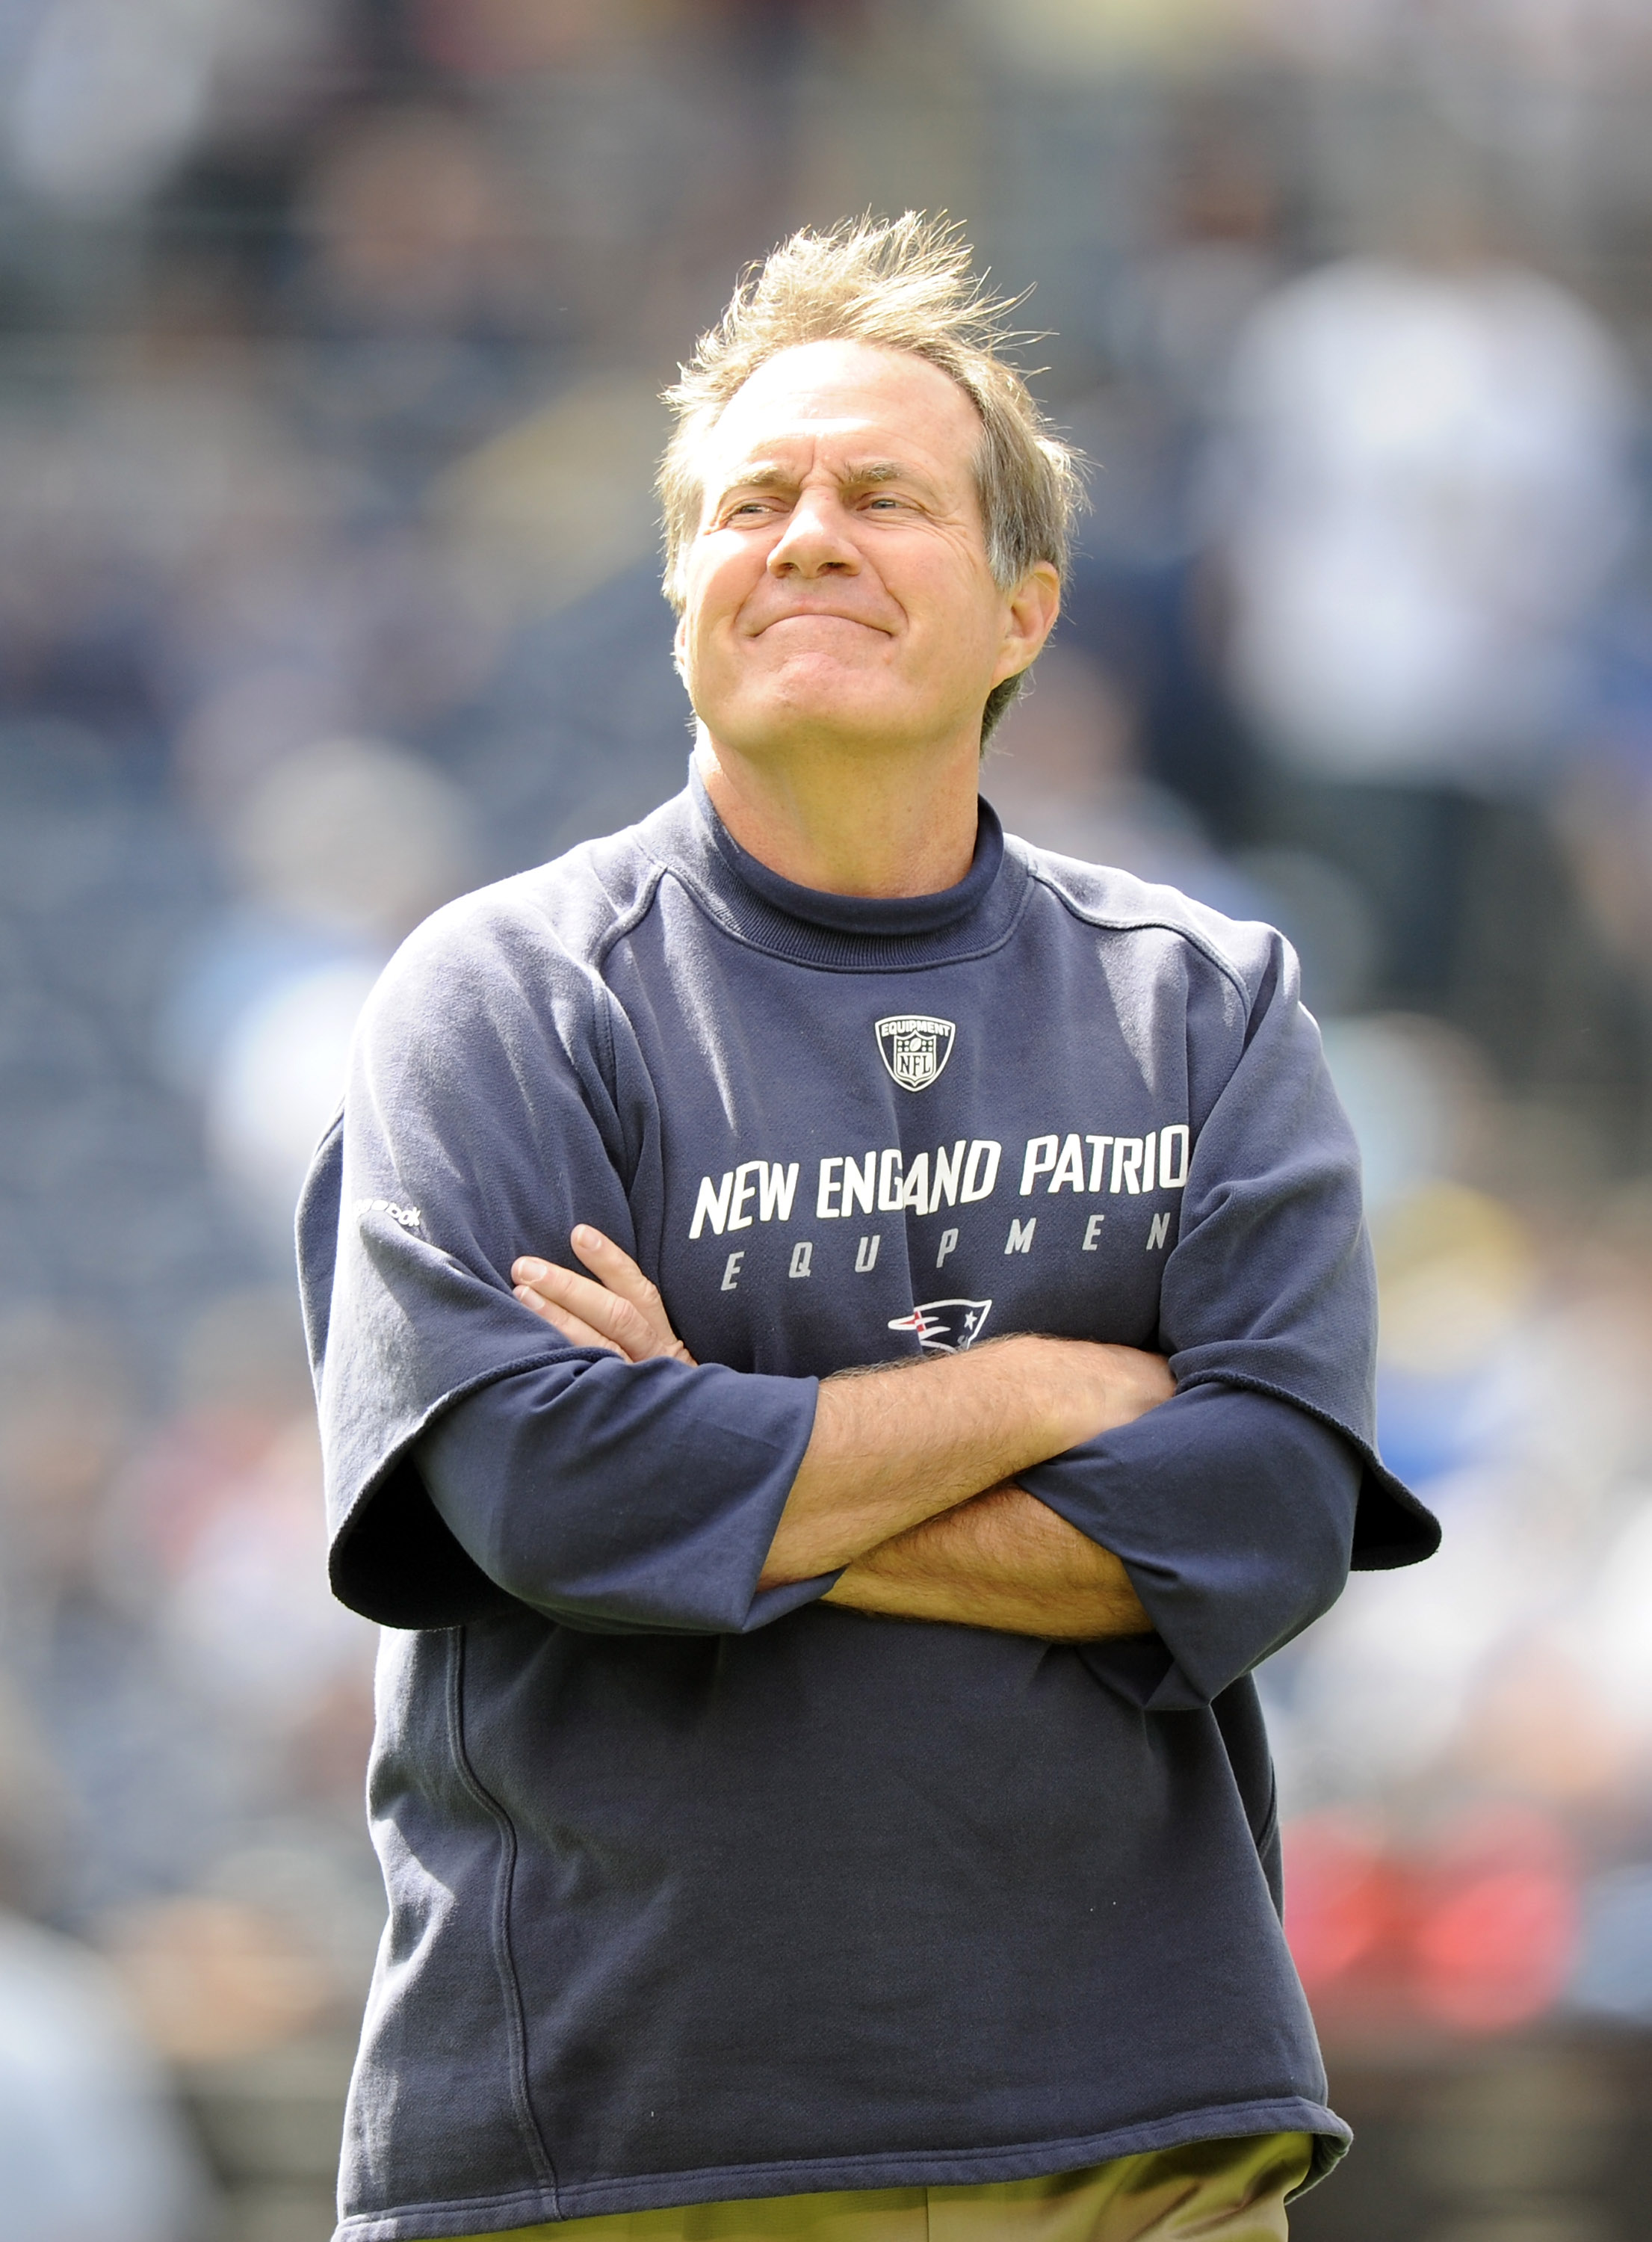 SAN DIEGO - OCTOBER 24:  Head Coach Bill Belichick of the New England Patriots during warm up against the San Diego Chargers at Qualcomm Stadium on October 24, 2010 in San Diego, California.  (Photo by Harry How/Getty Images)